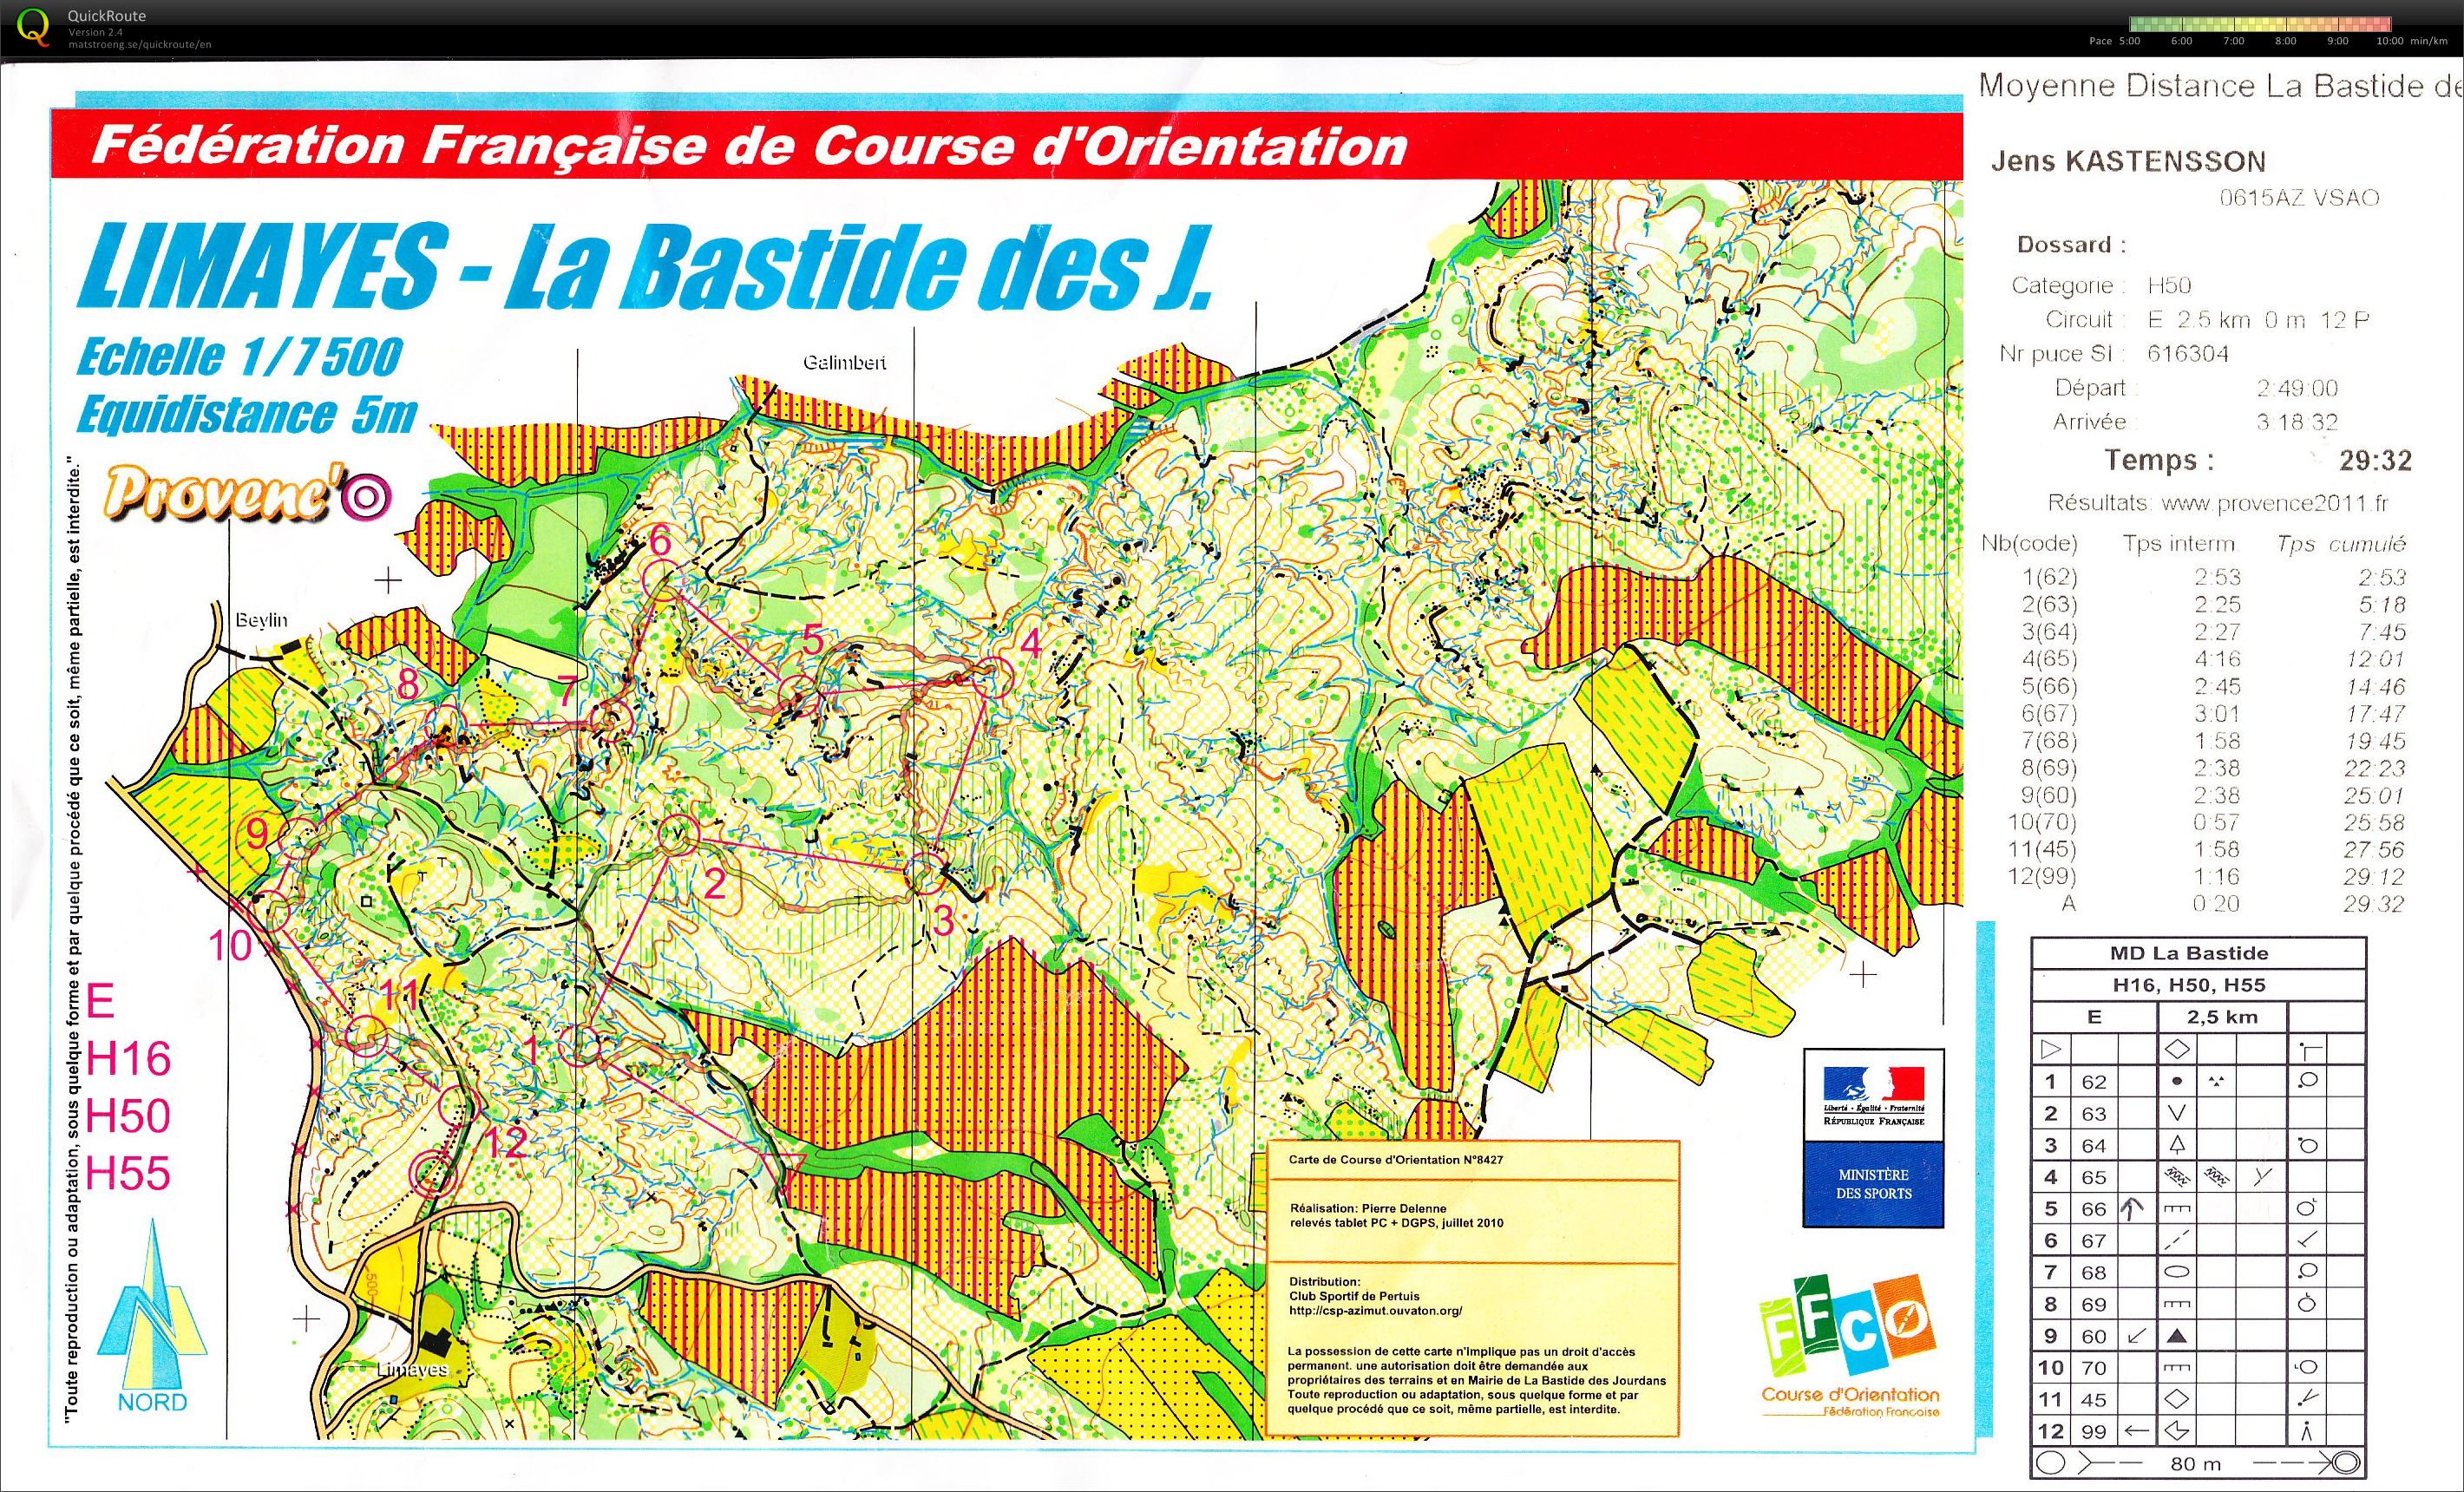 Nationale south-east Day 1 - Middle - H50 (19.05.2012)